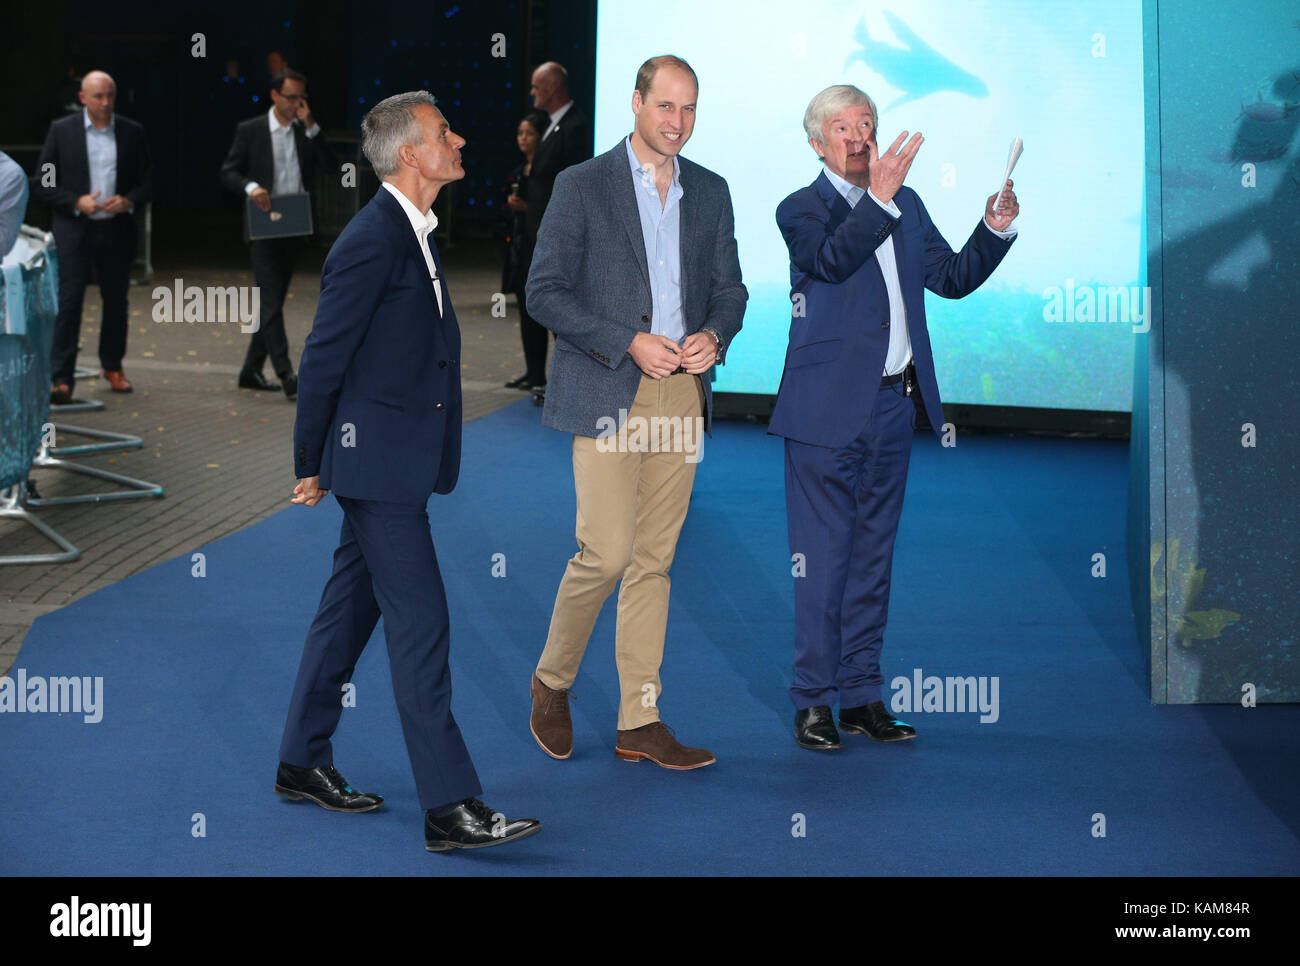 The Duke of Cambridge, with Lord Hall, the Director-General of the BBC (right) and Tim Davie, CEO, BBC Worldwide and Director, Global (left) arrives for the World Premiere screening of the BBC's Blue Planet II at the British Film Institute IMAX cinema, in London. Stock Photo